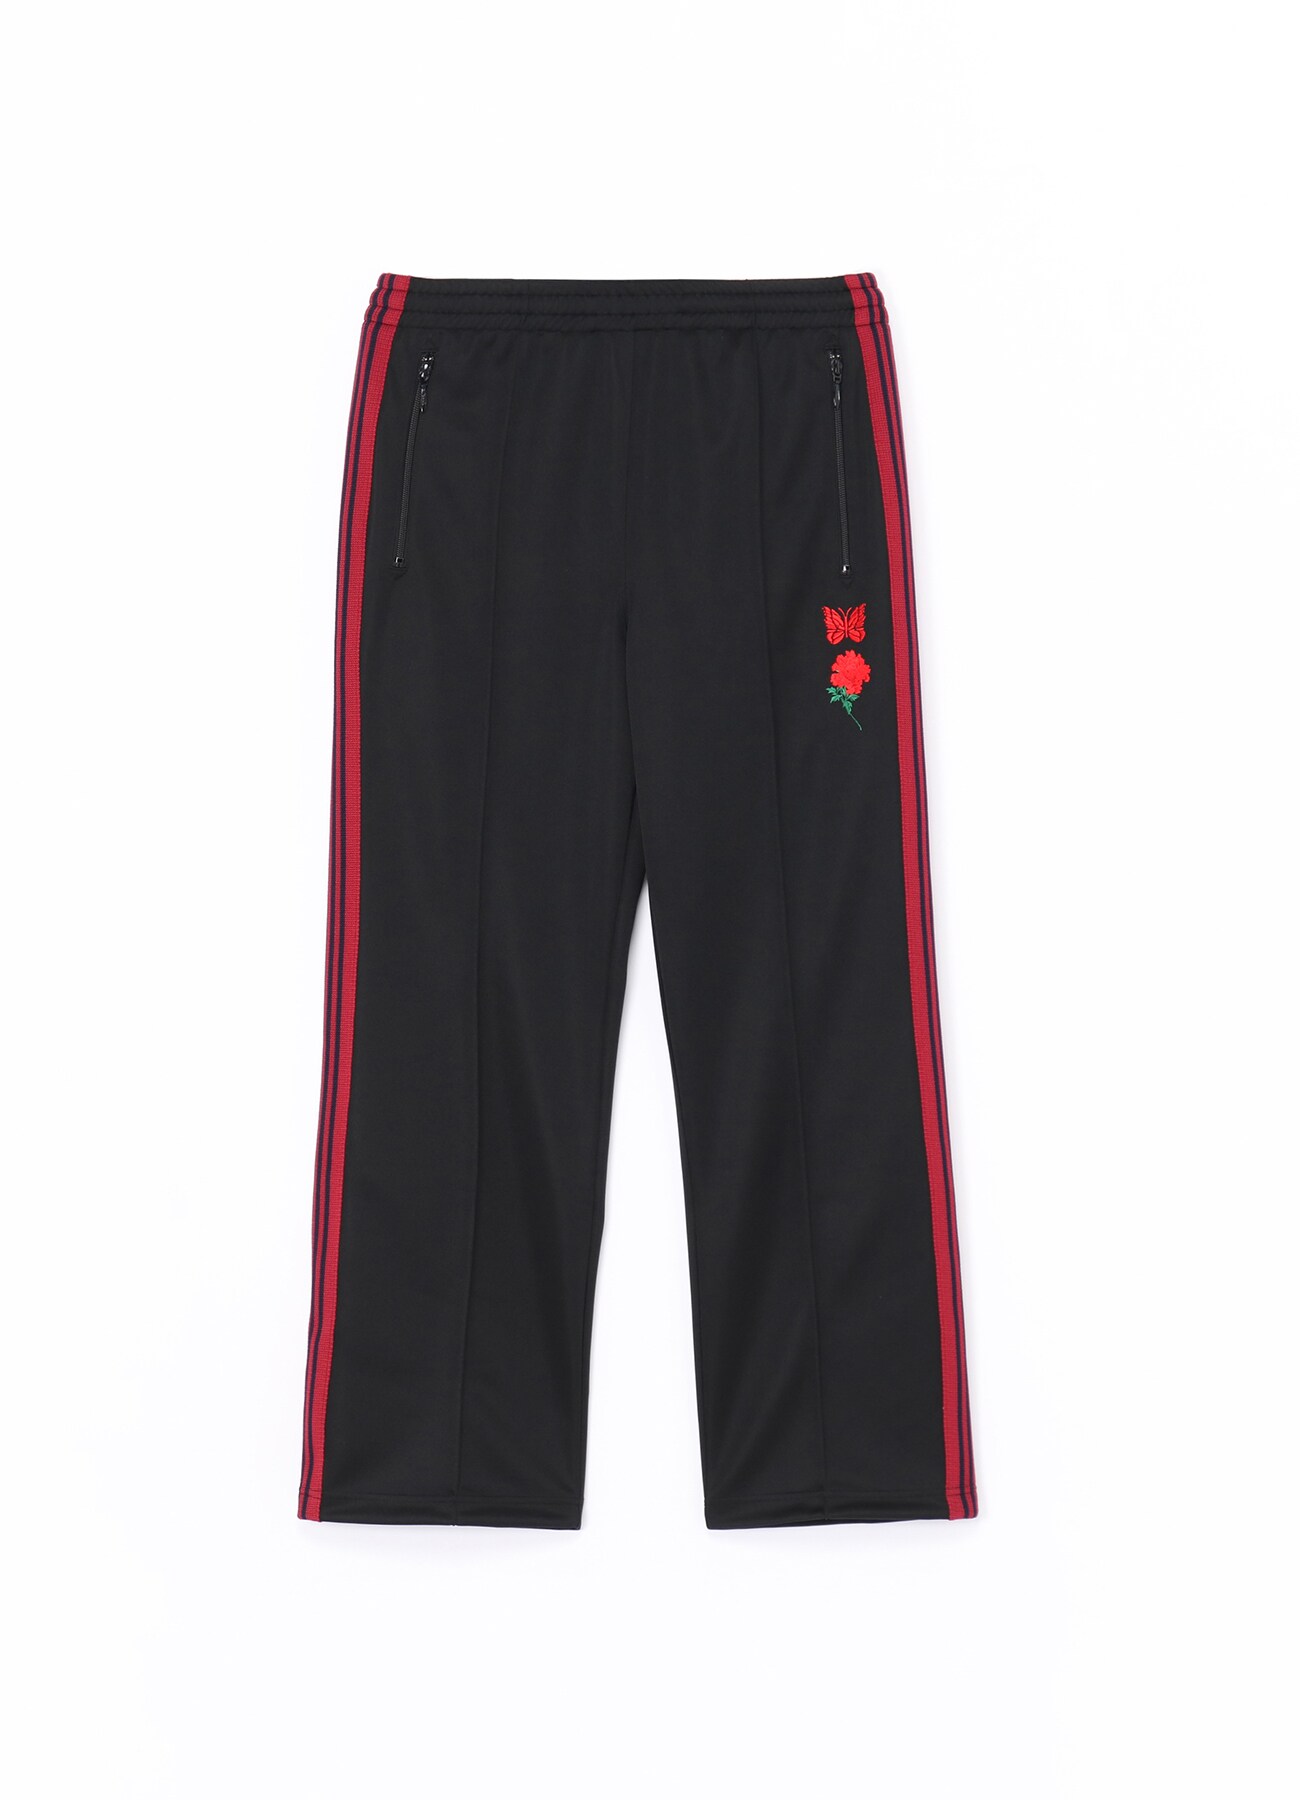 WILDSIDE × NEEDLES Narrow Track Pant (RED×NAVY)